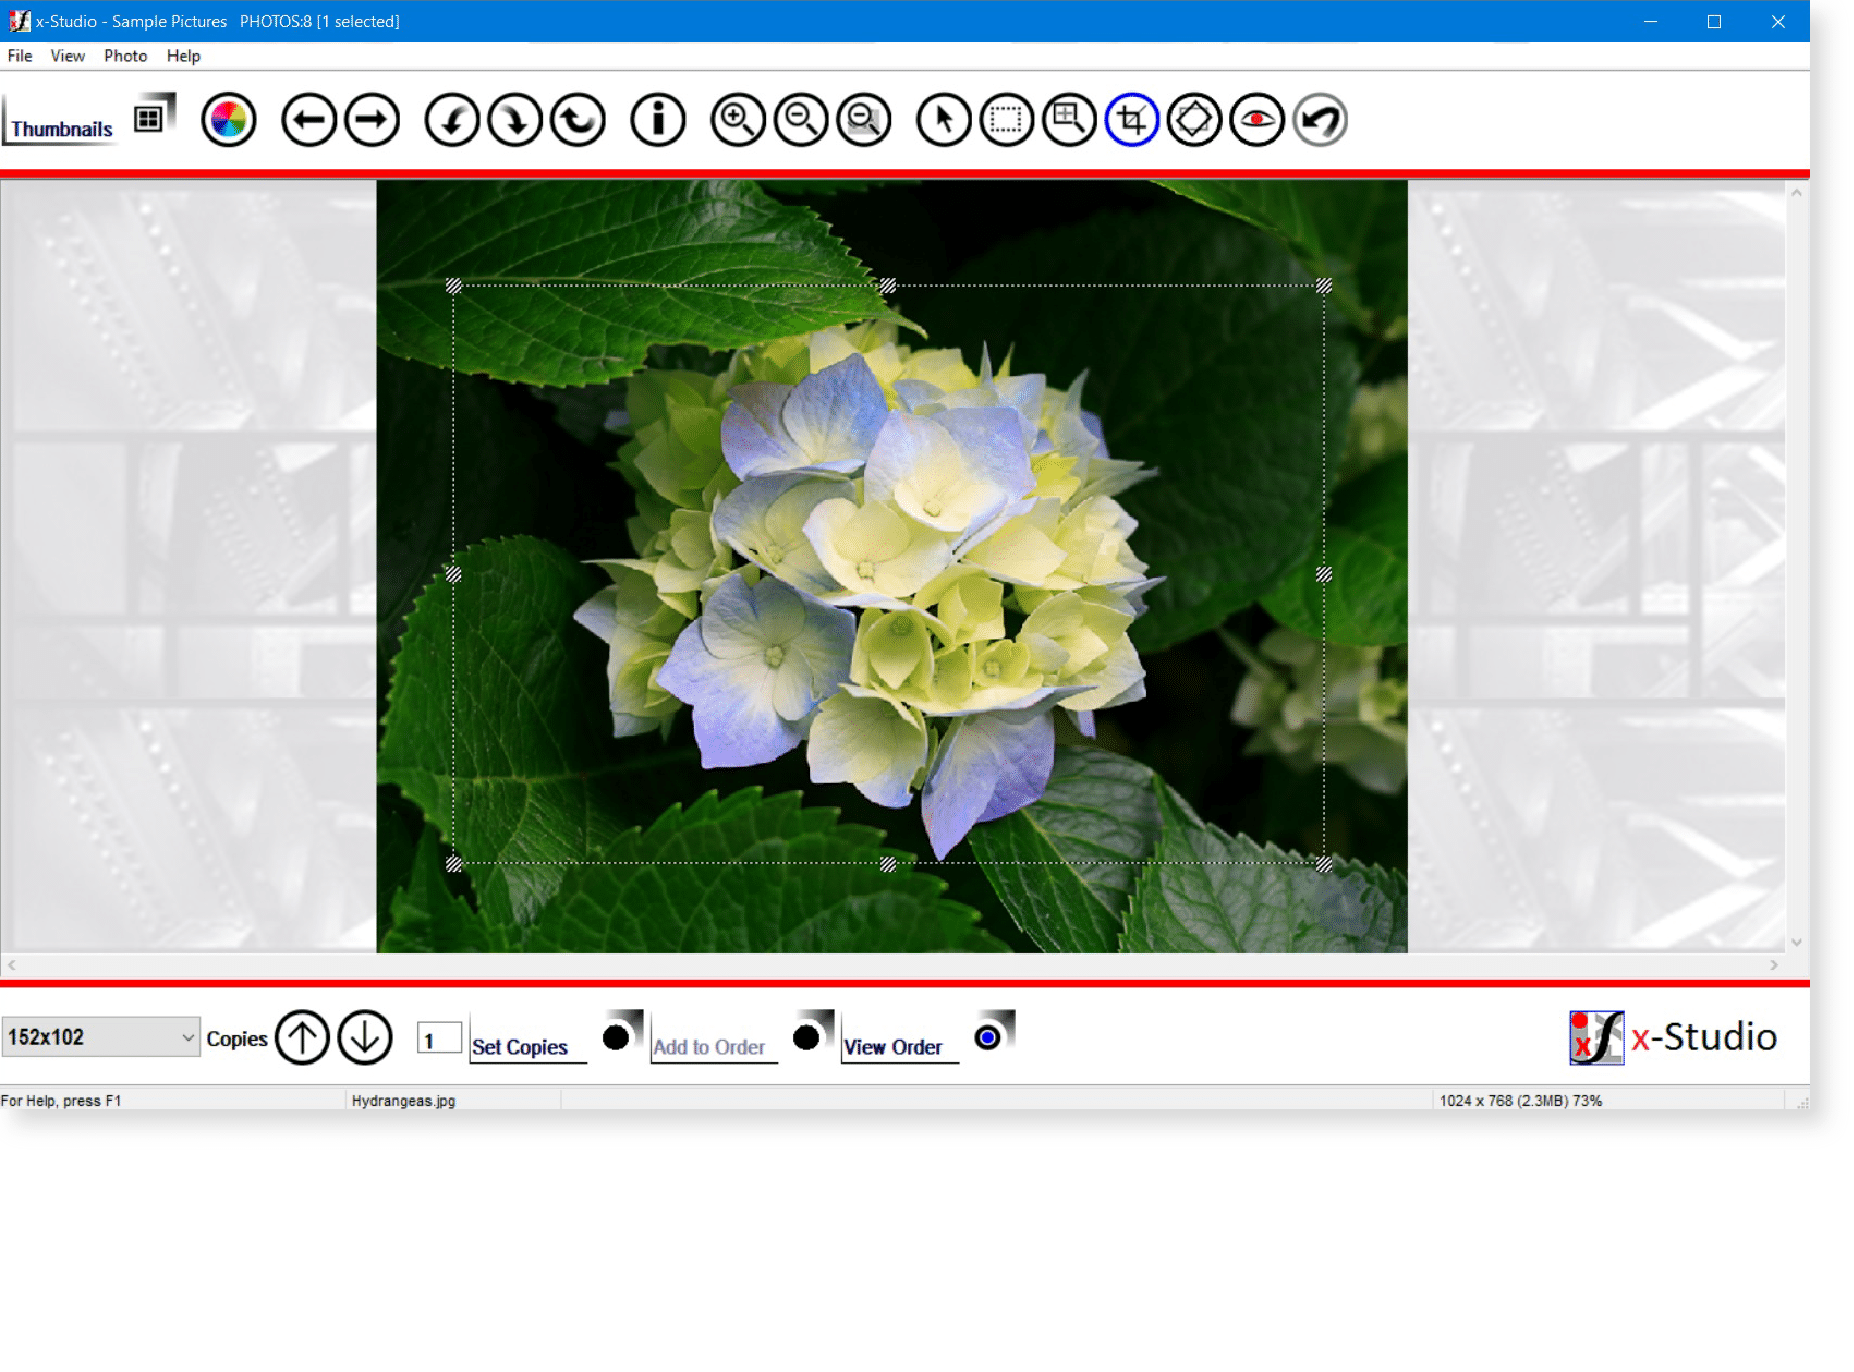 Make simple changes like zoom and crop to prepare a batch of images for printing